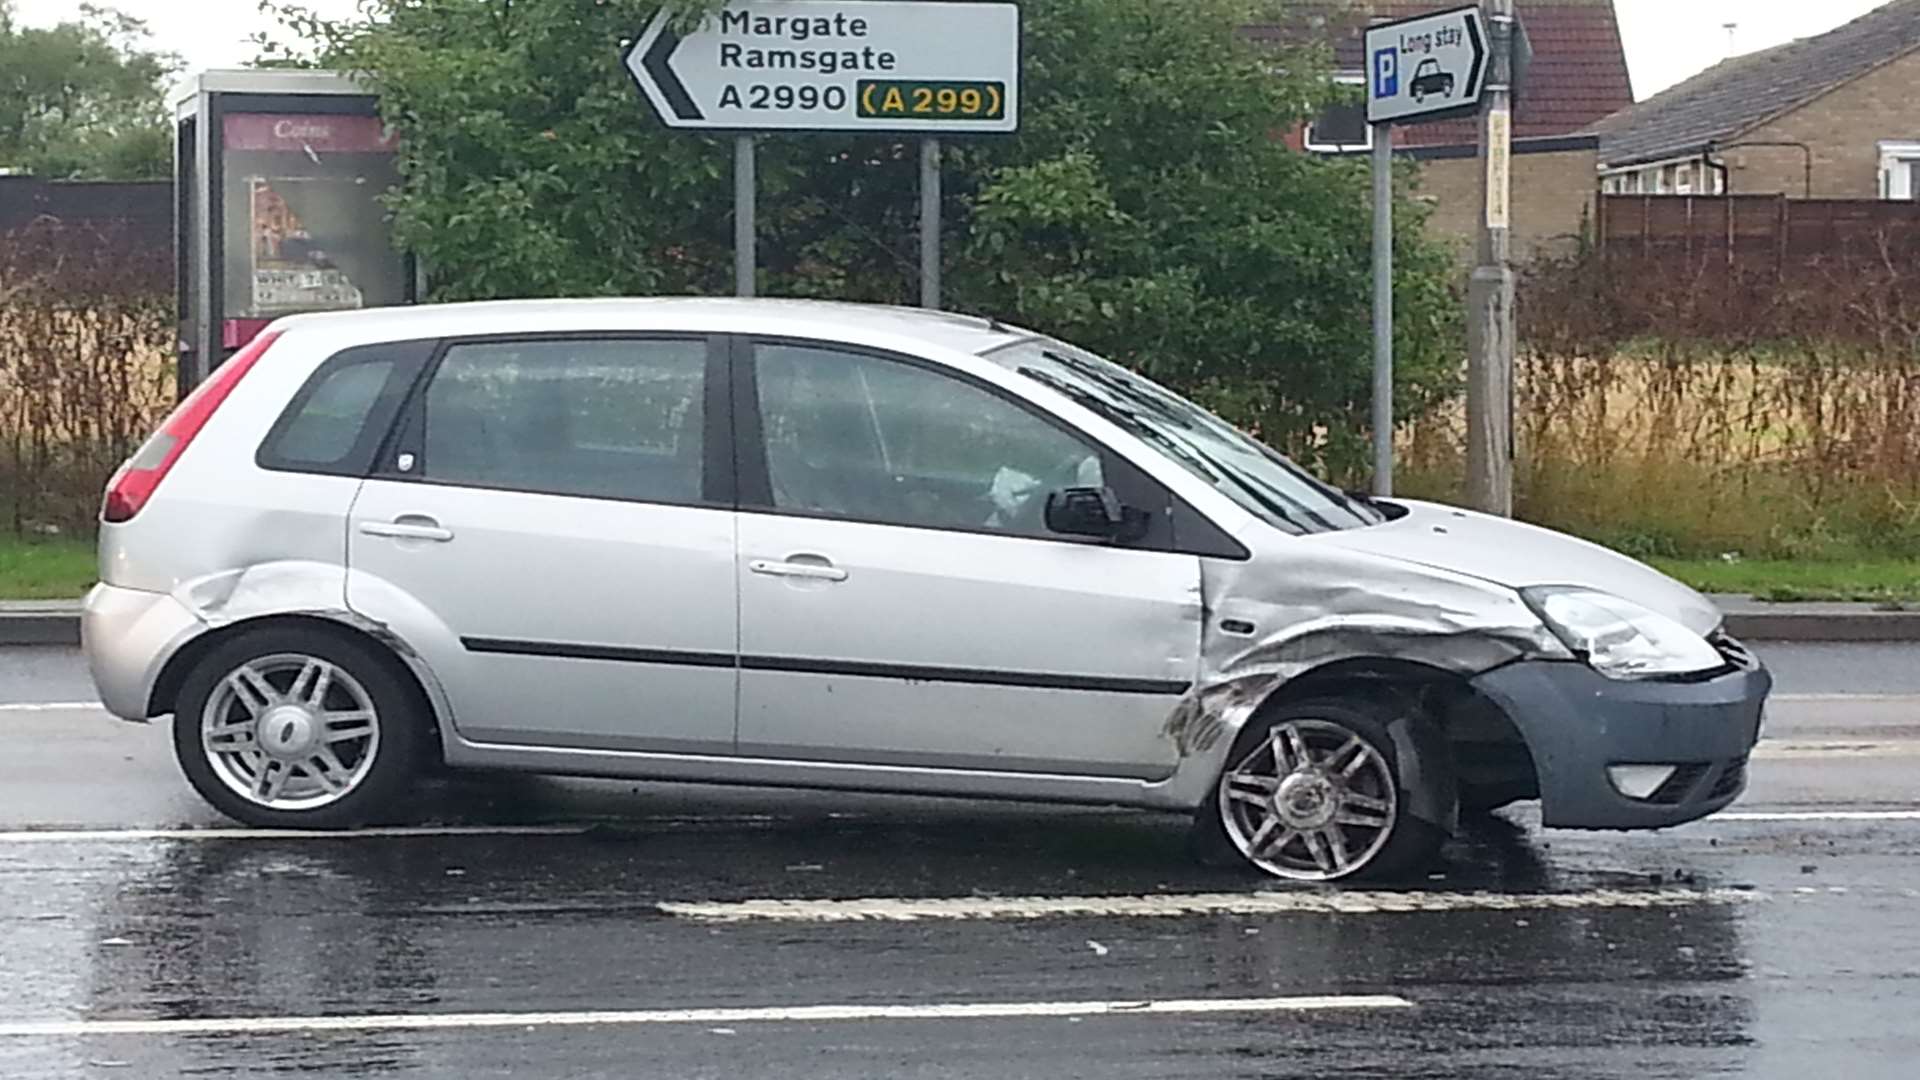 The damaged Ford Fiesta